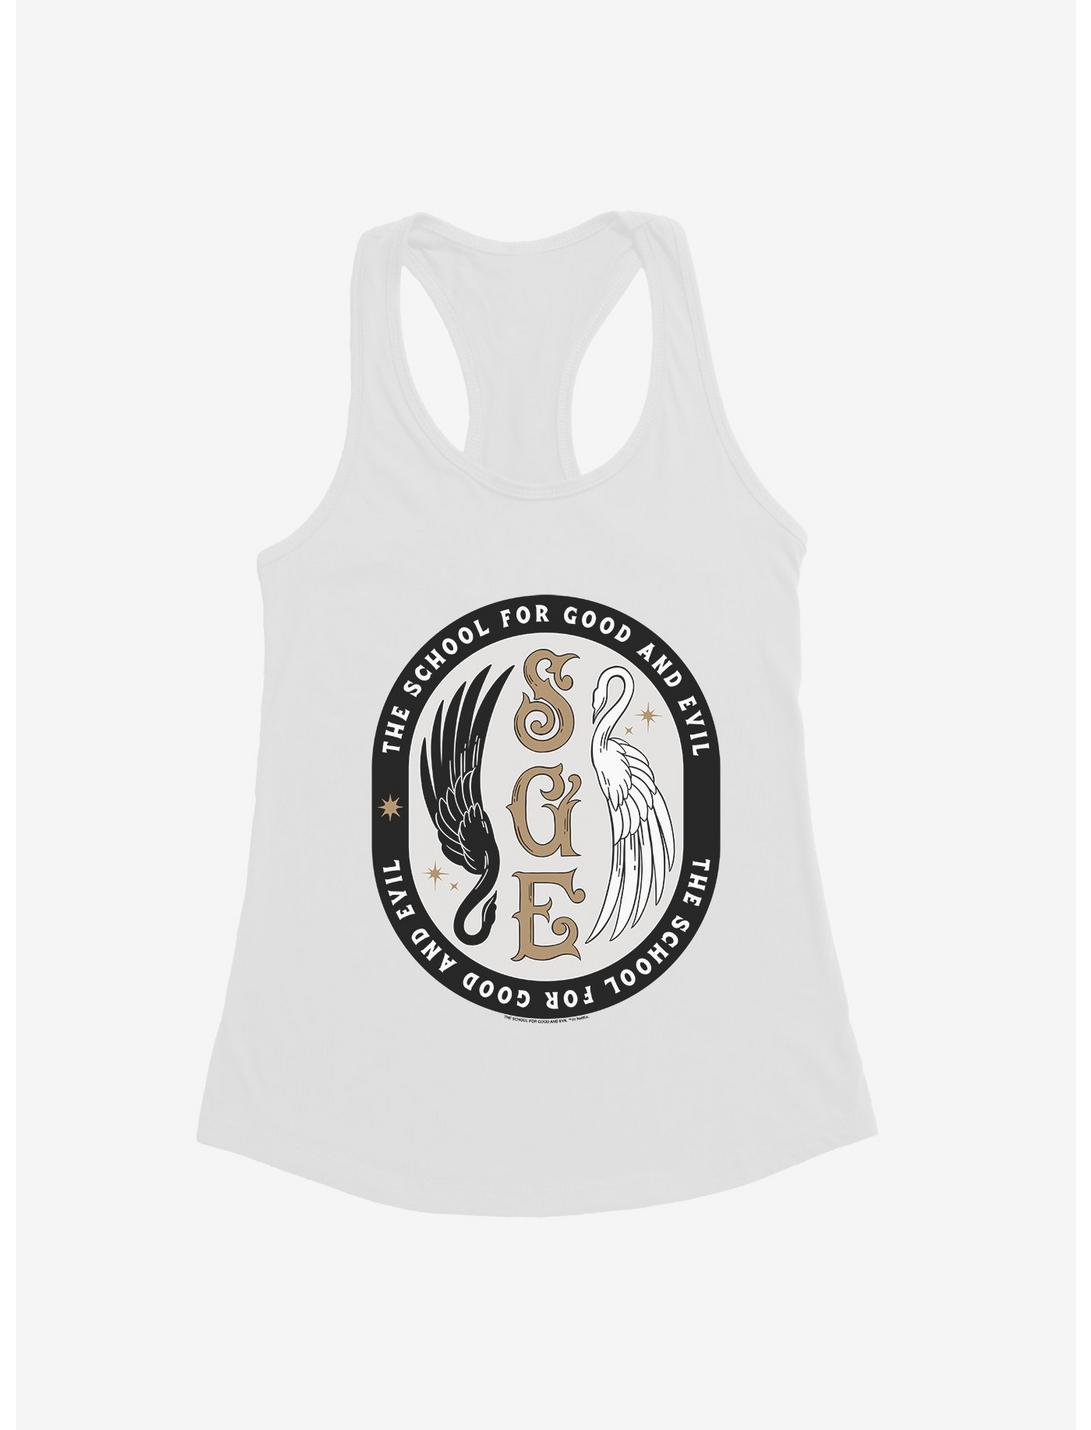 The School For Good And Evil Swan Emblem Girls Tank, WHITE, hi-res